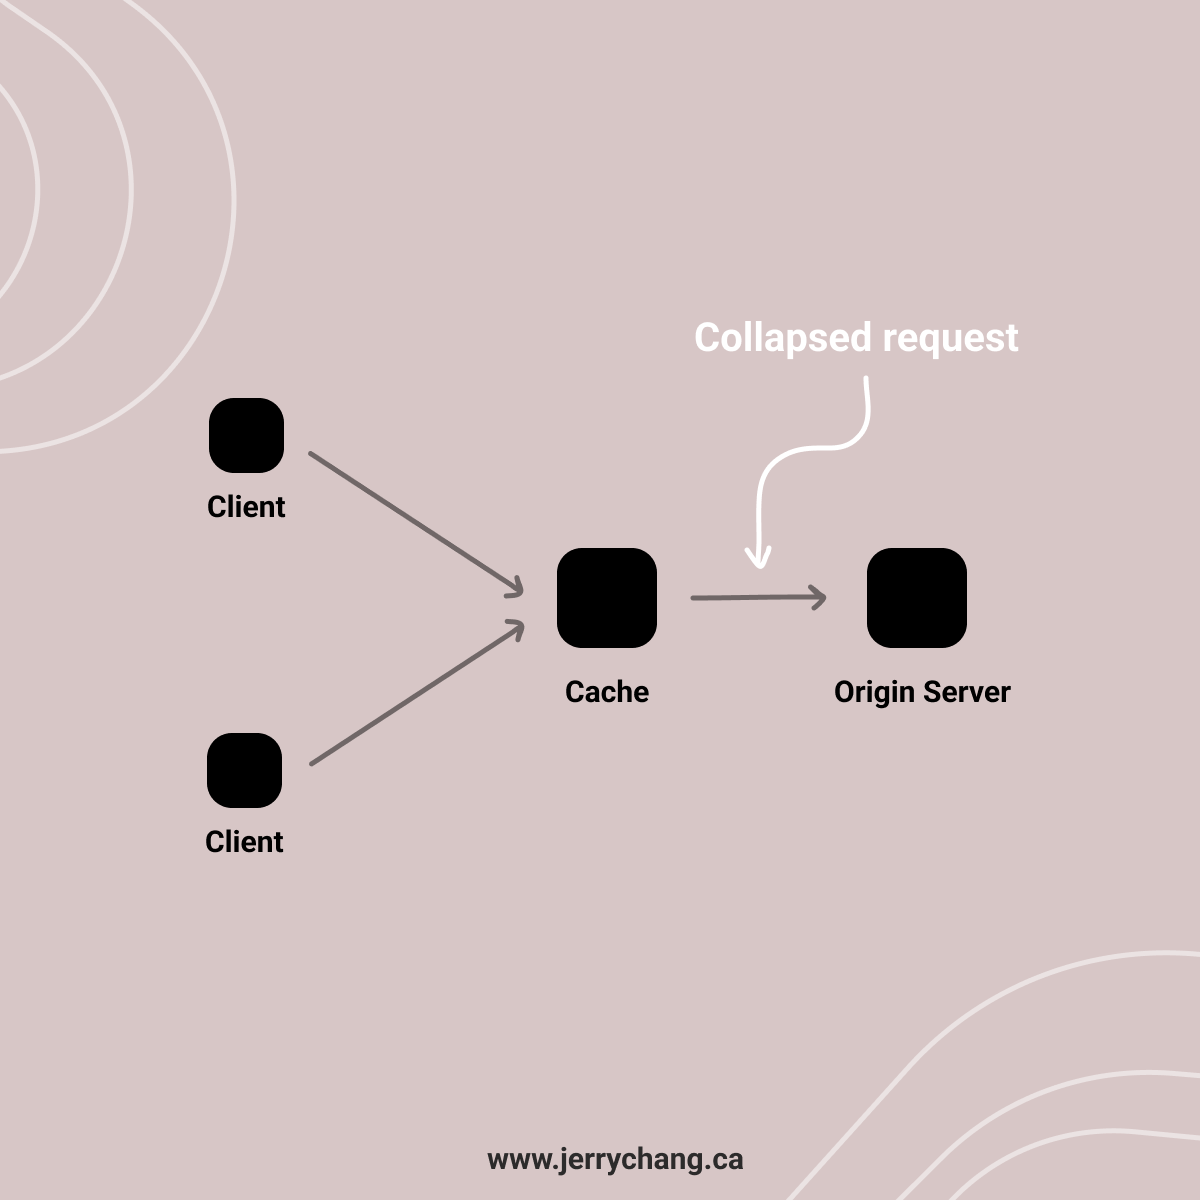 Illustration of the request collapsing from multiple clients